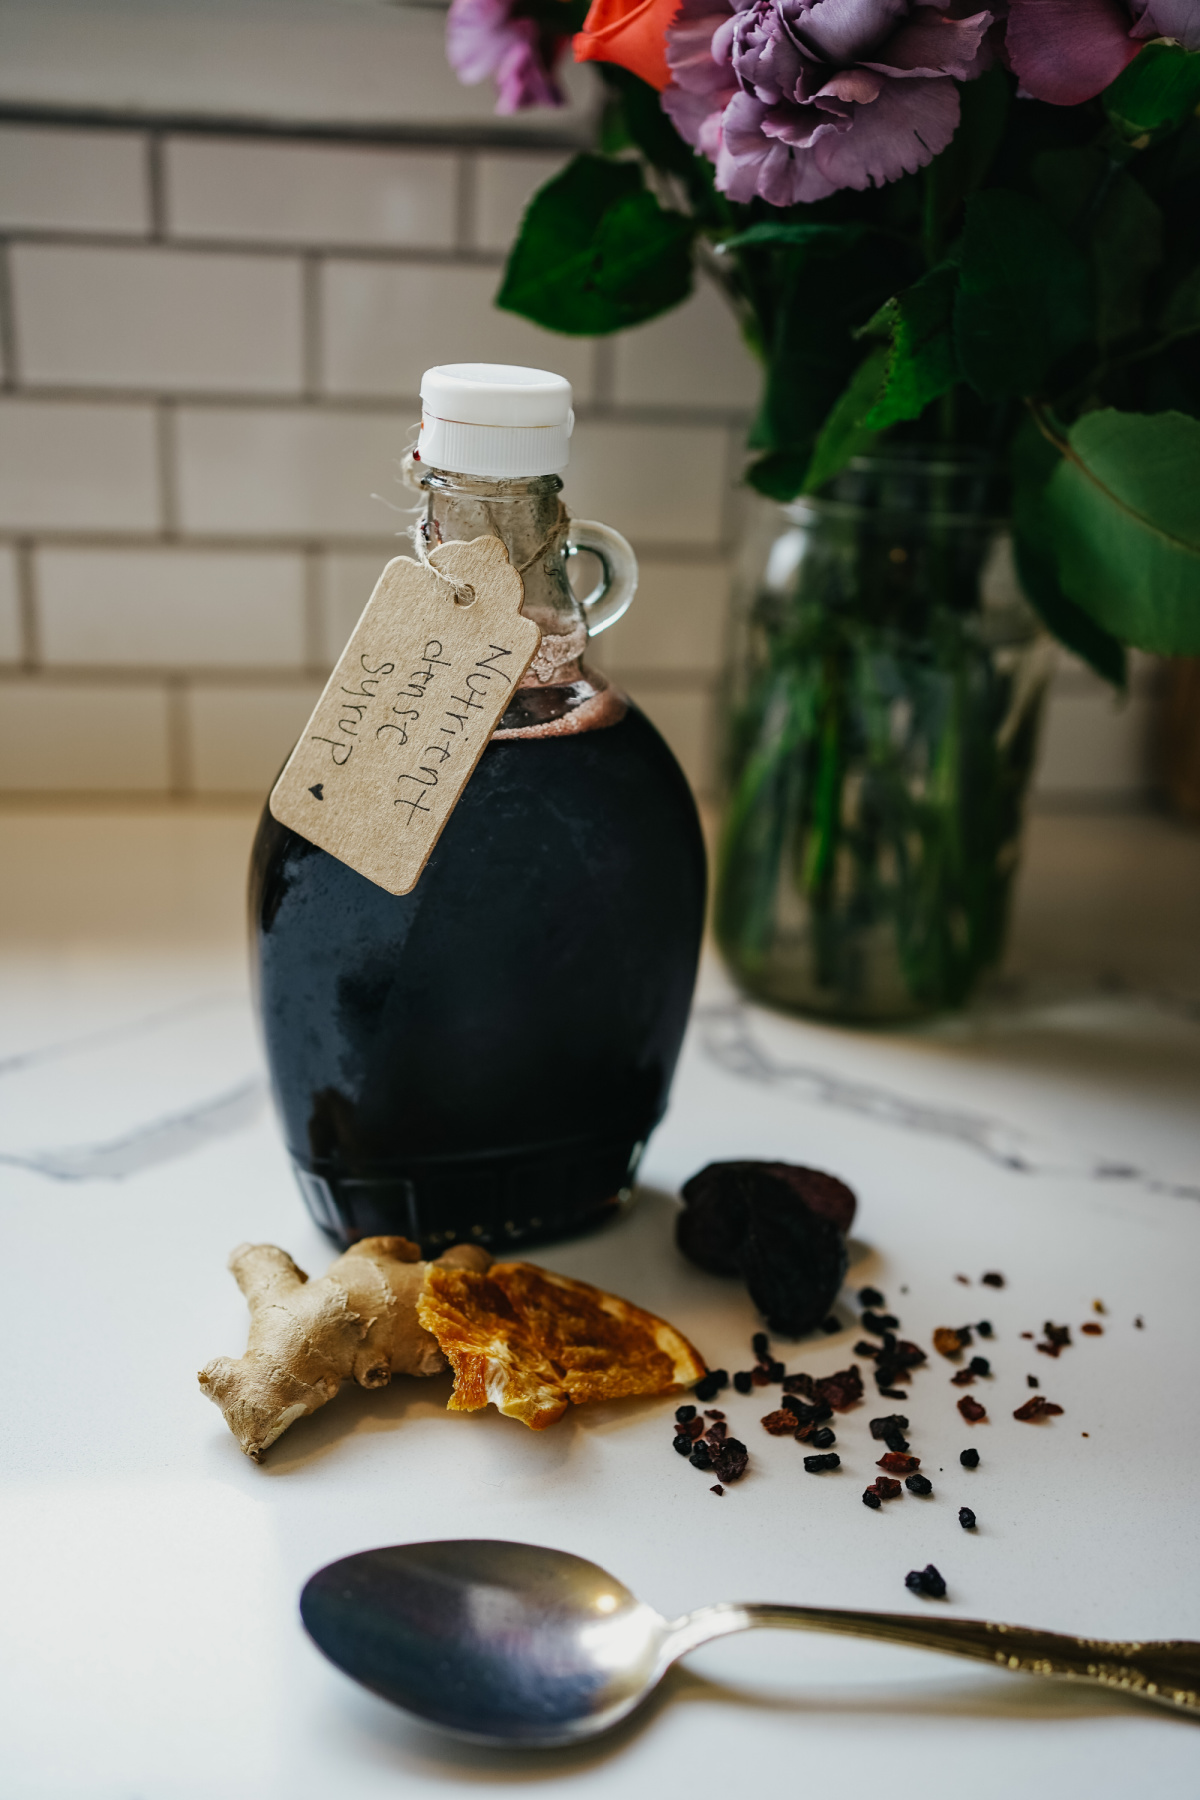 nutrient-dense syrup finished product